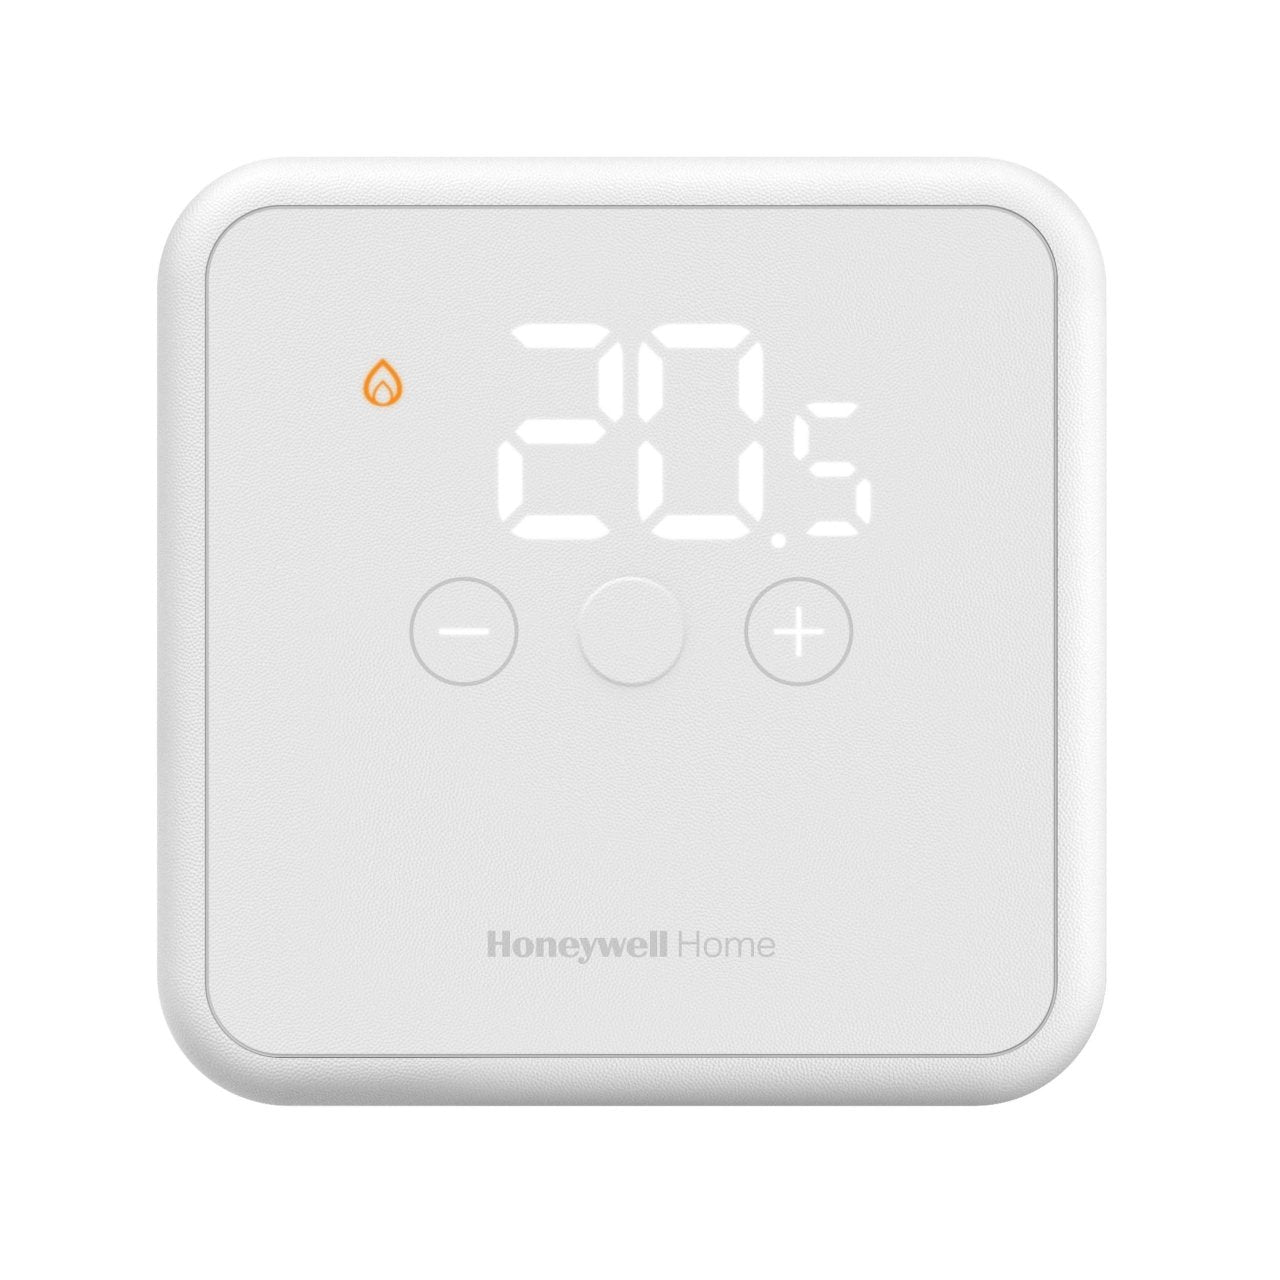 DT4 White Wired Room Thermostat with On/Off DT40WT20